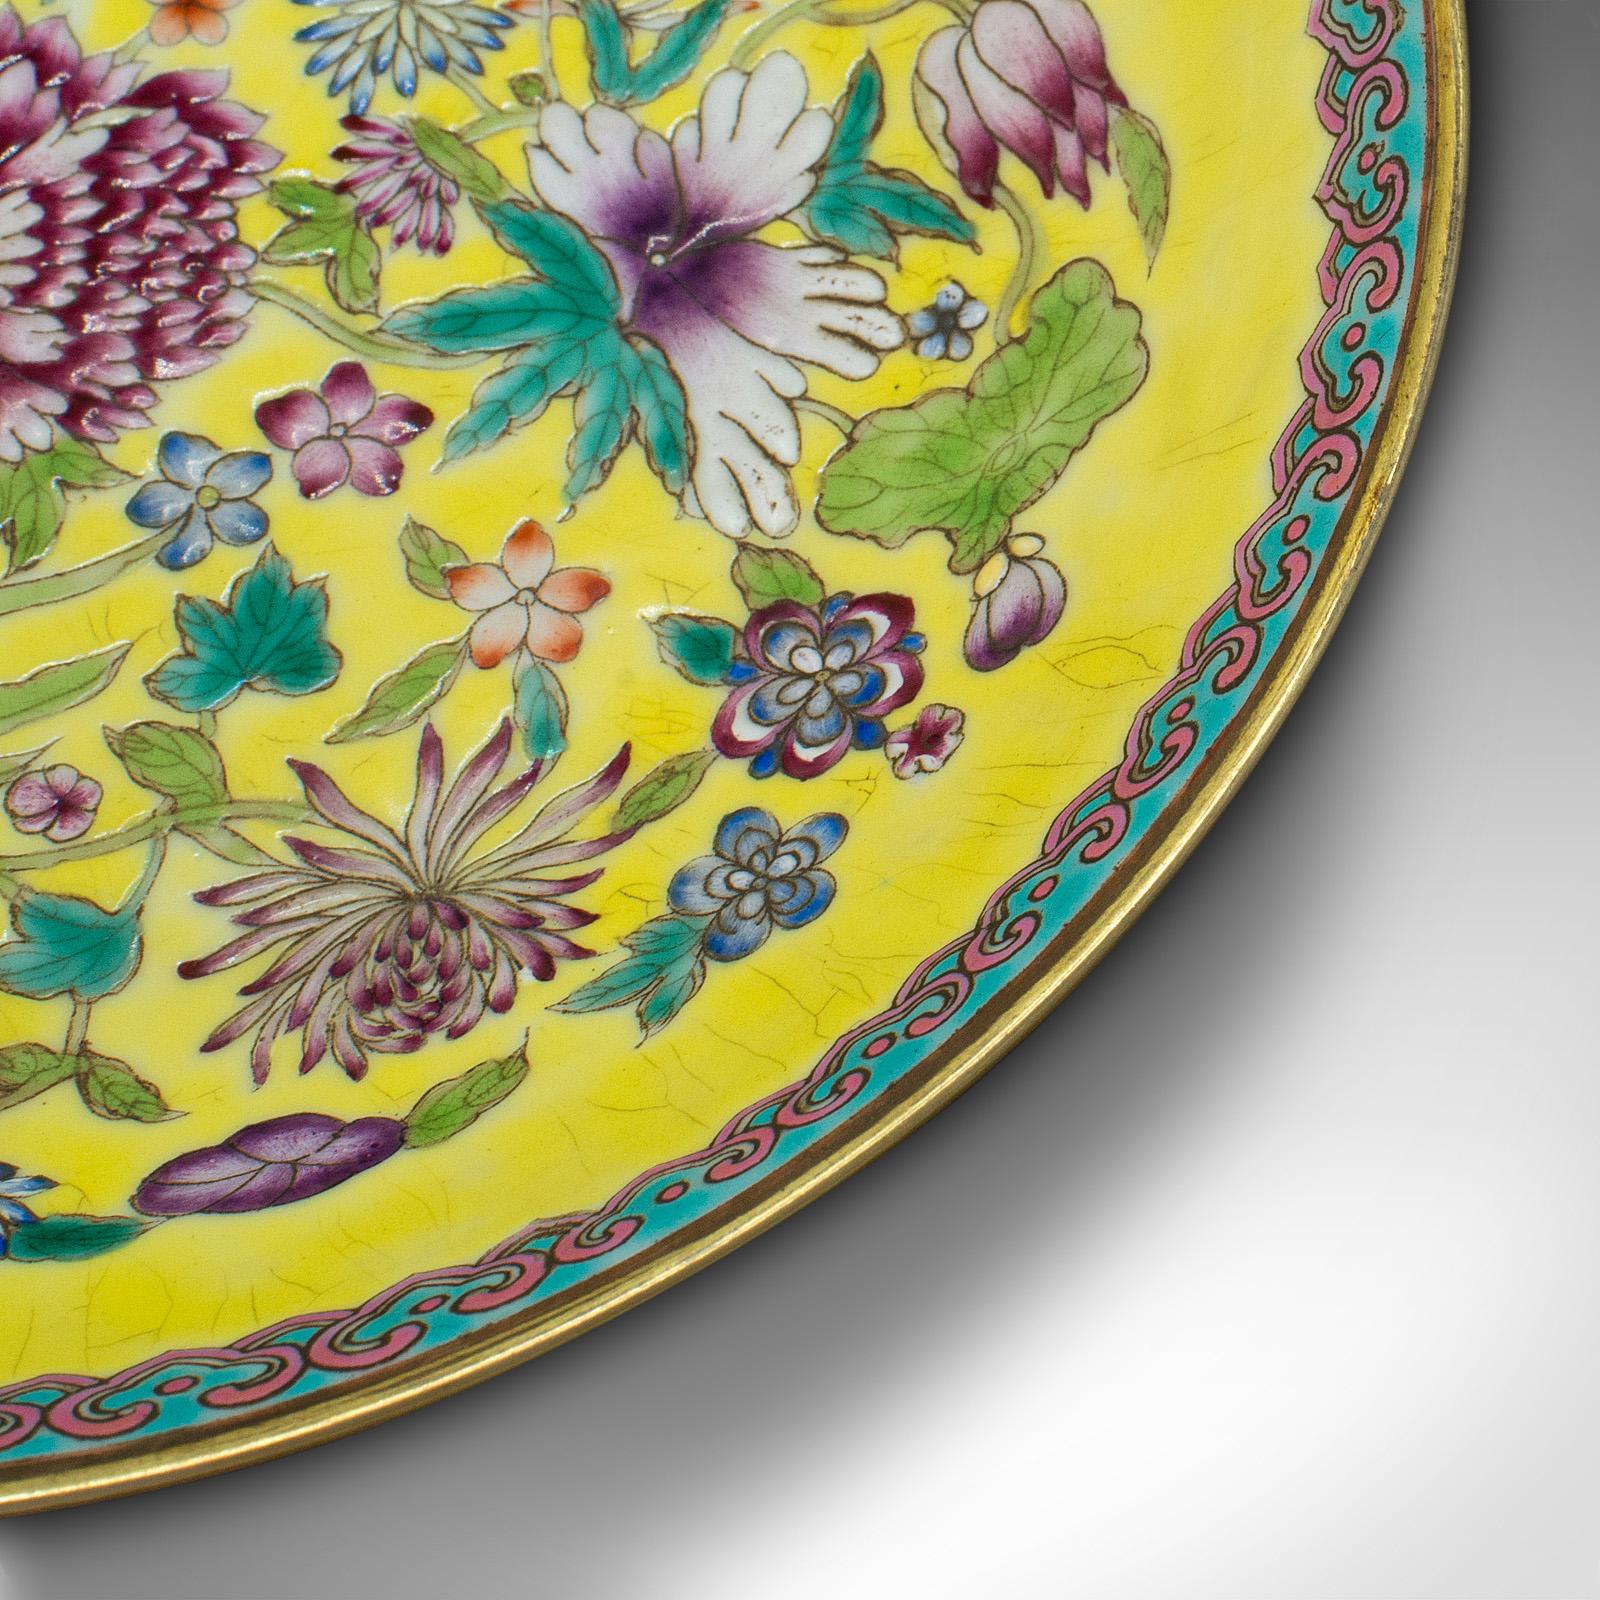 Antique Famille Jaune Decorative Dish, Chinese, Display Plate, Qing, Victorian For Sale 2